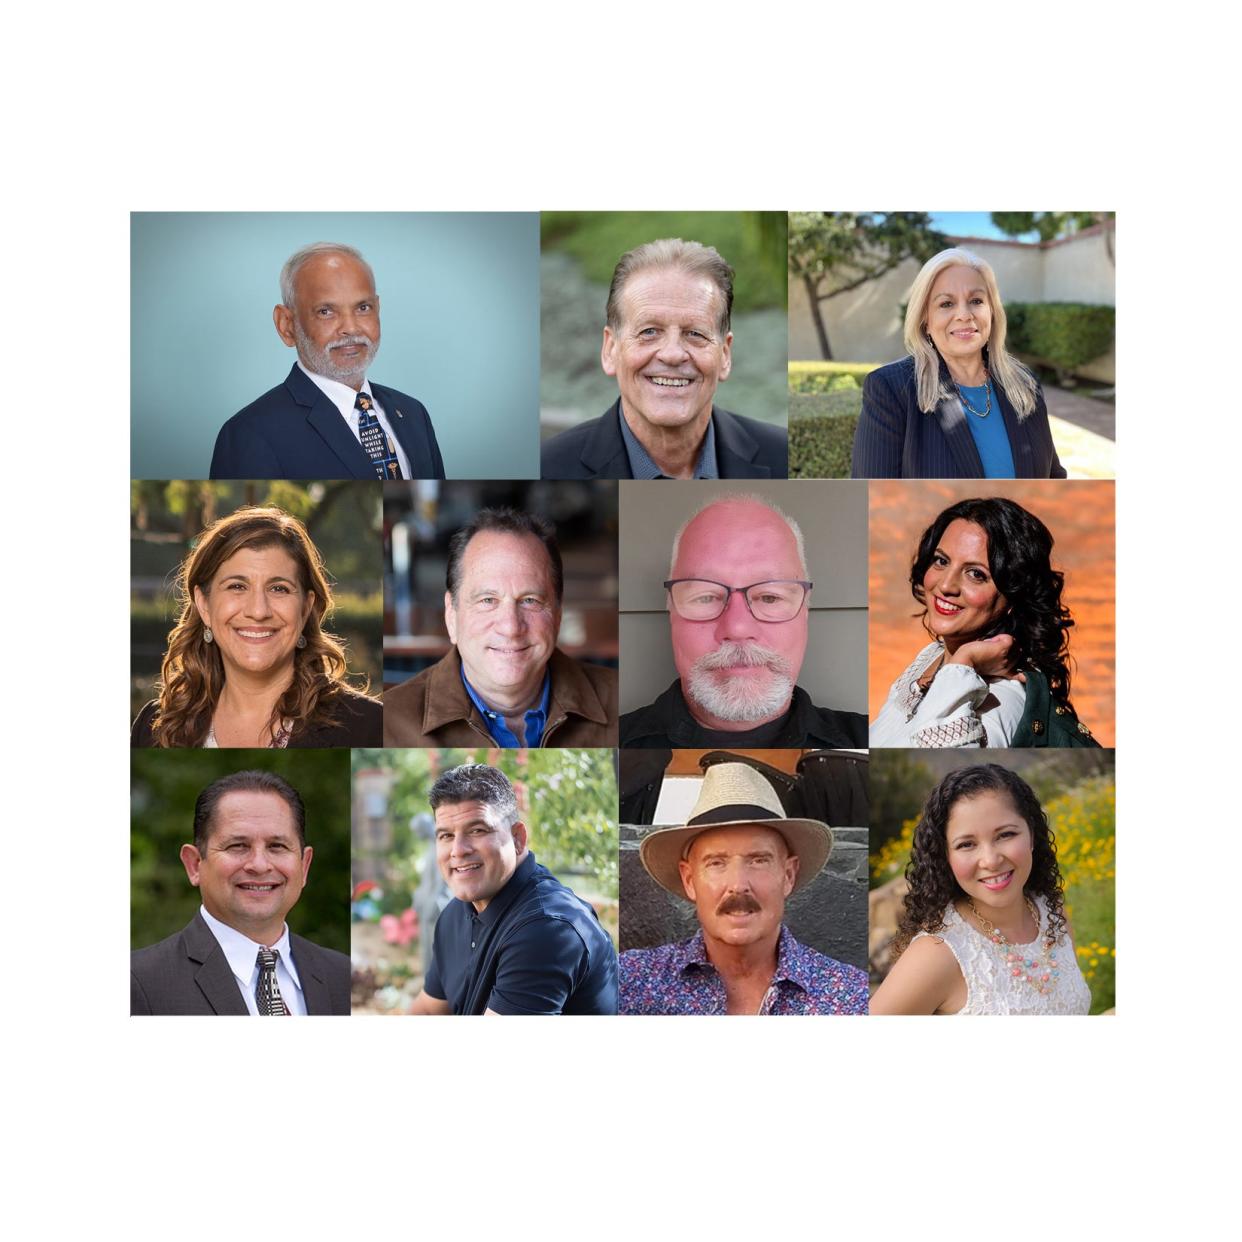 Candidates for Camarillo City Council, from top left, include Vishnu Patel, David Tennessen, Sylvia Schnopp in District 1, Susan Santangelo, Jeff Walker, Dirk Lay and Sylvia Garcia in District 2 and Bill Camarillo, Charles Sandlin, Tim Sprinkles and Martha Martinez-Bravo in District 5.